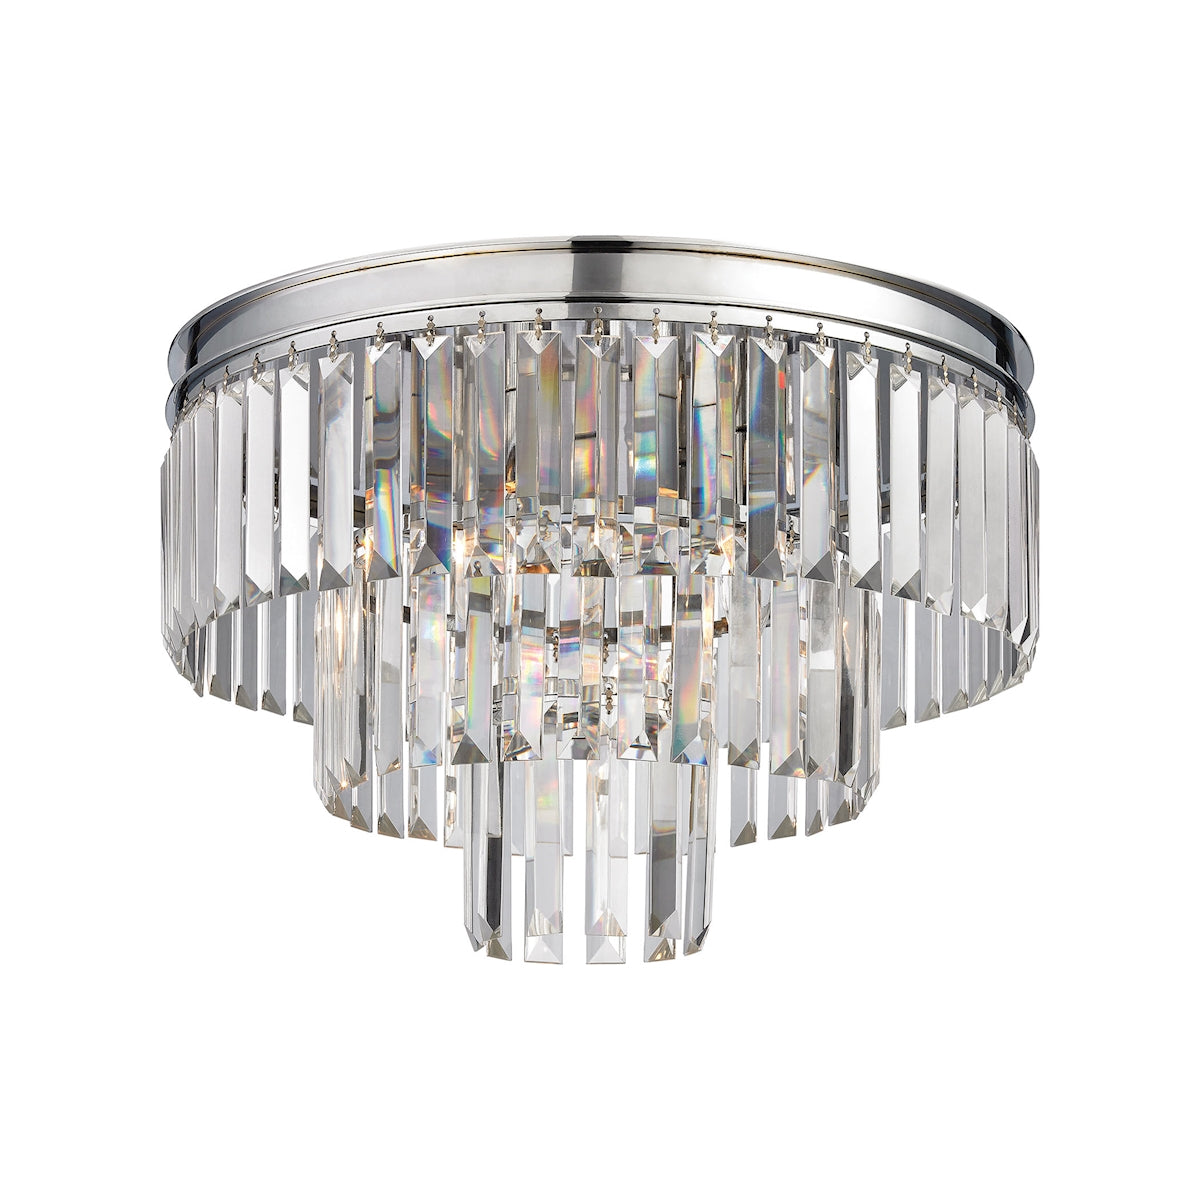 ELK Lighting 15215/3 Palacial 3-Light Semi Flush in Polished Chrome with Clear Crystal